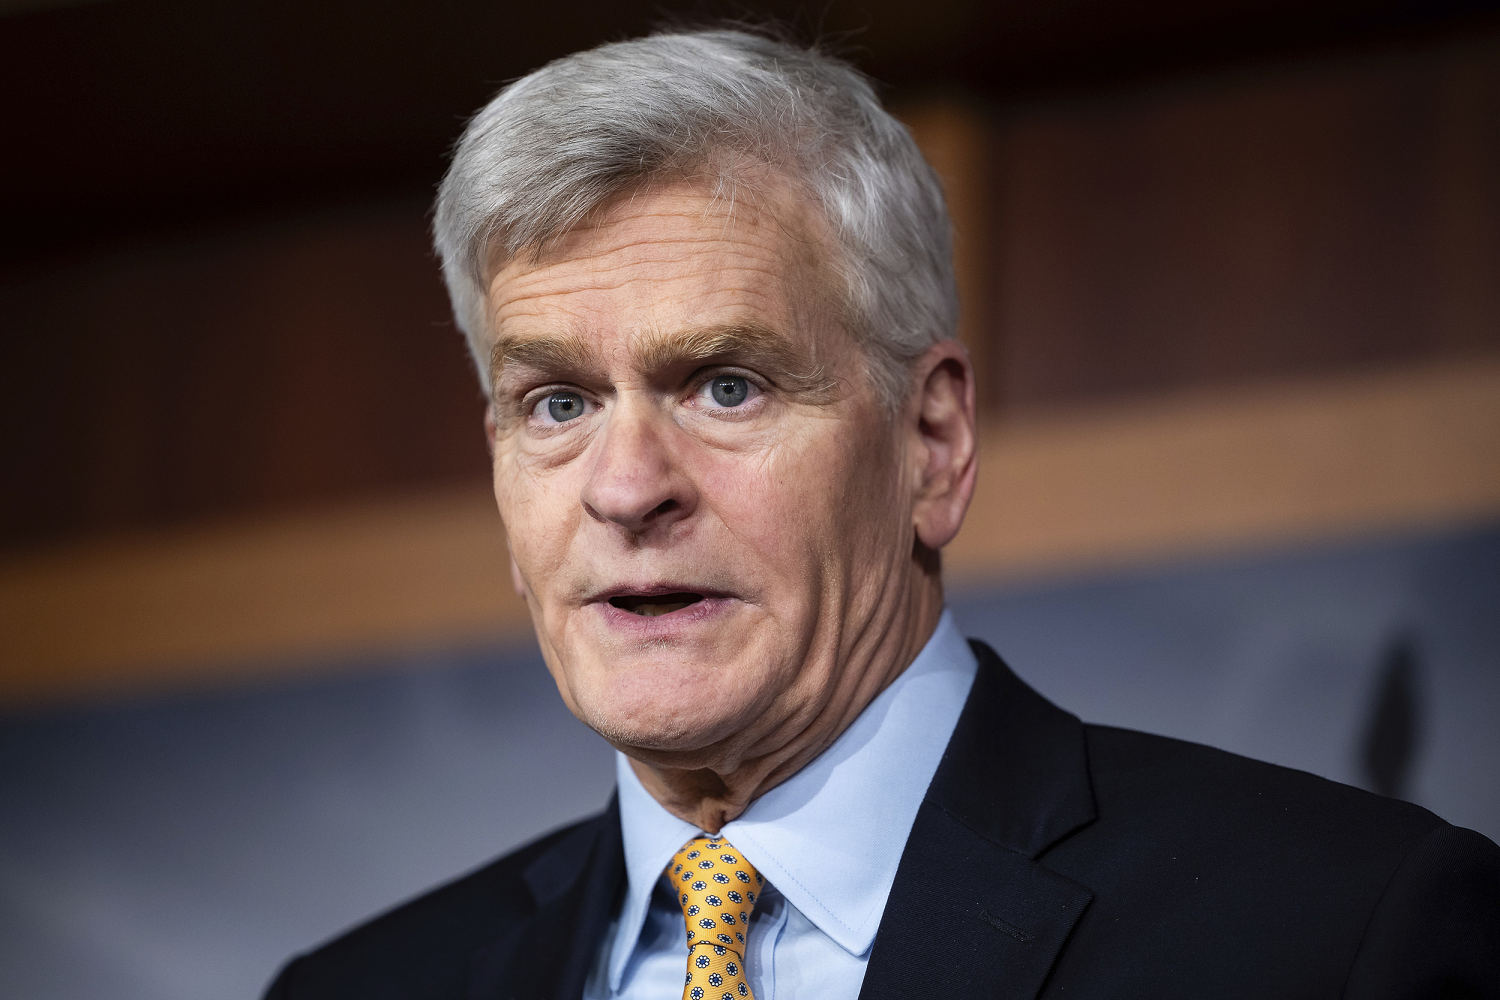 Sen. Bill Cassidy: Presidential race is 'a sorry state of affairs'